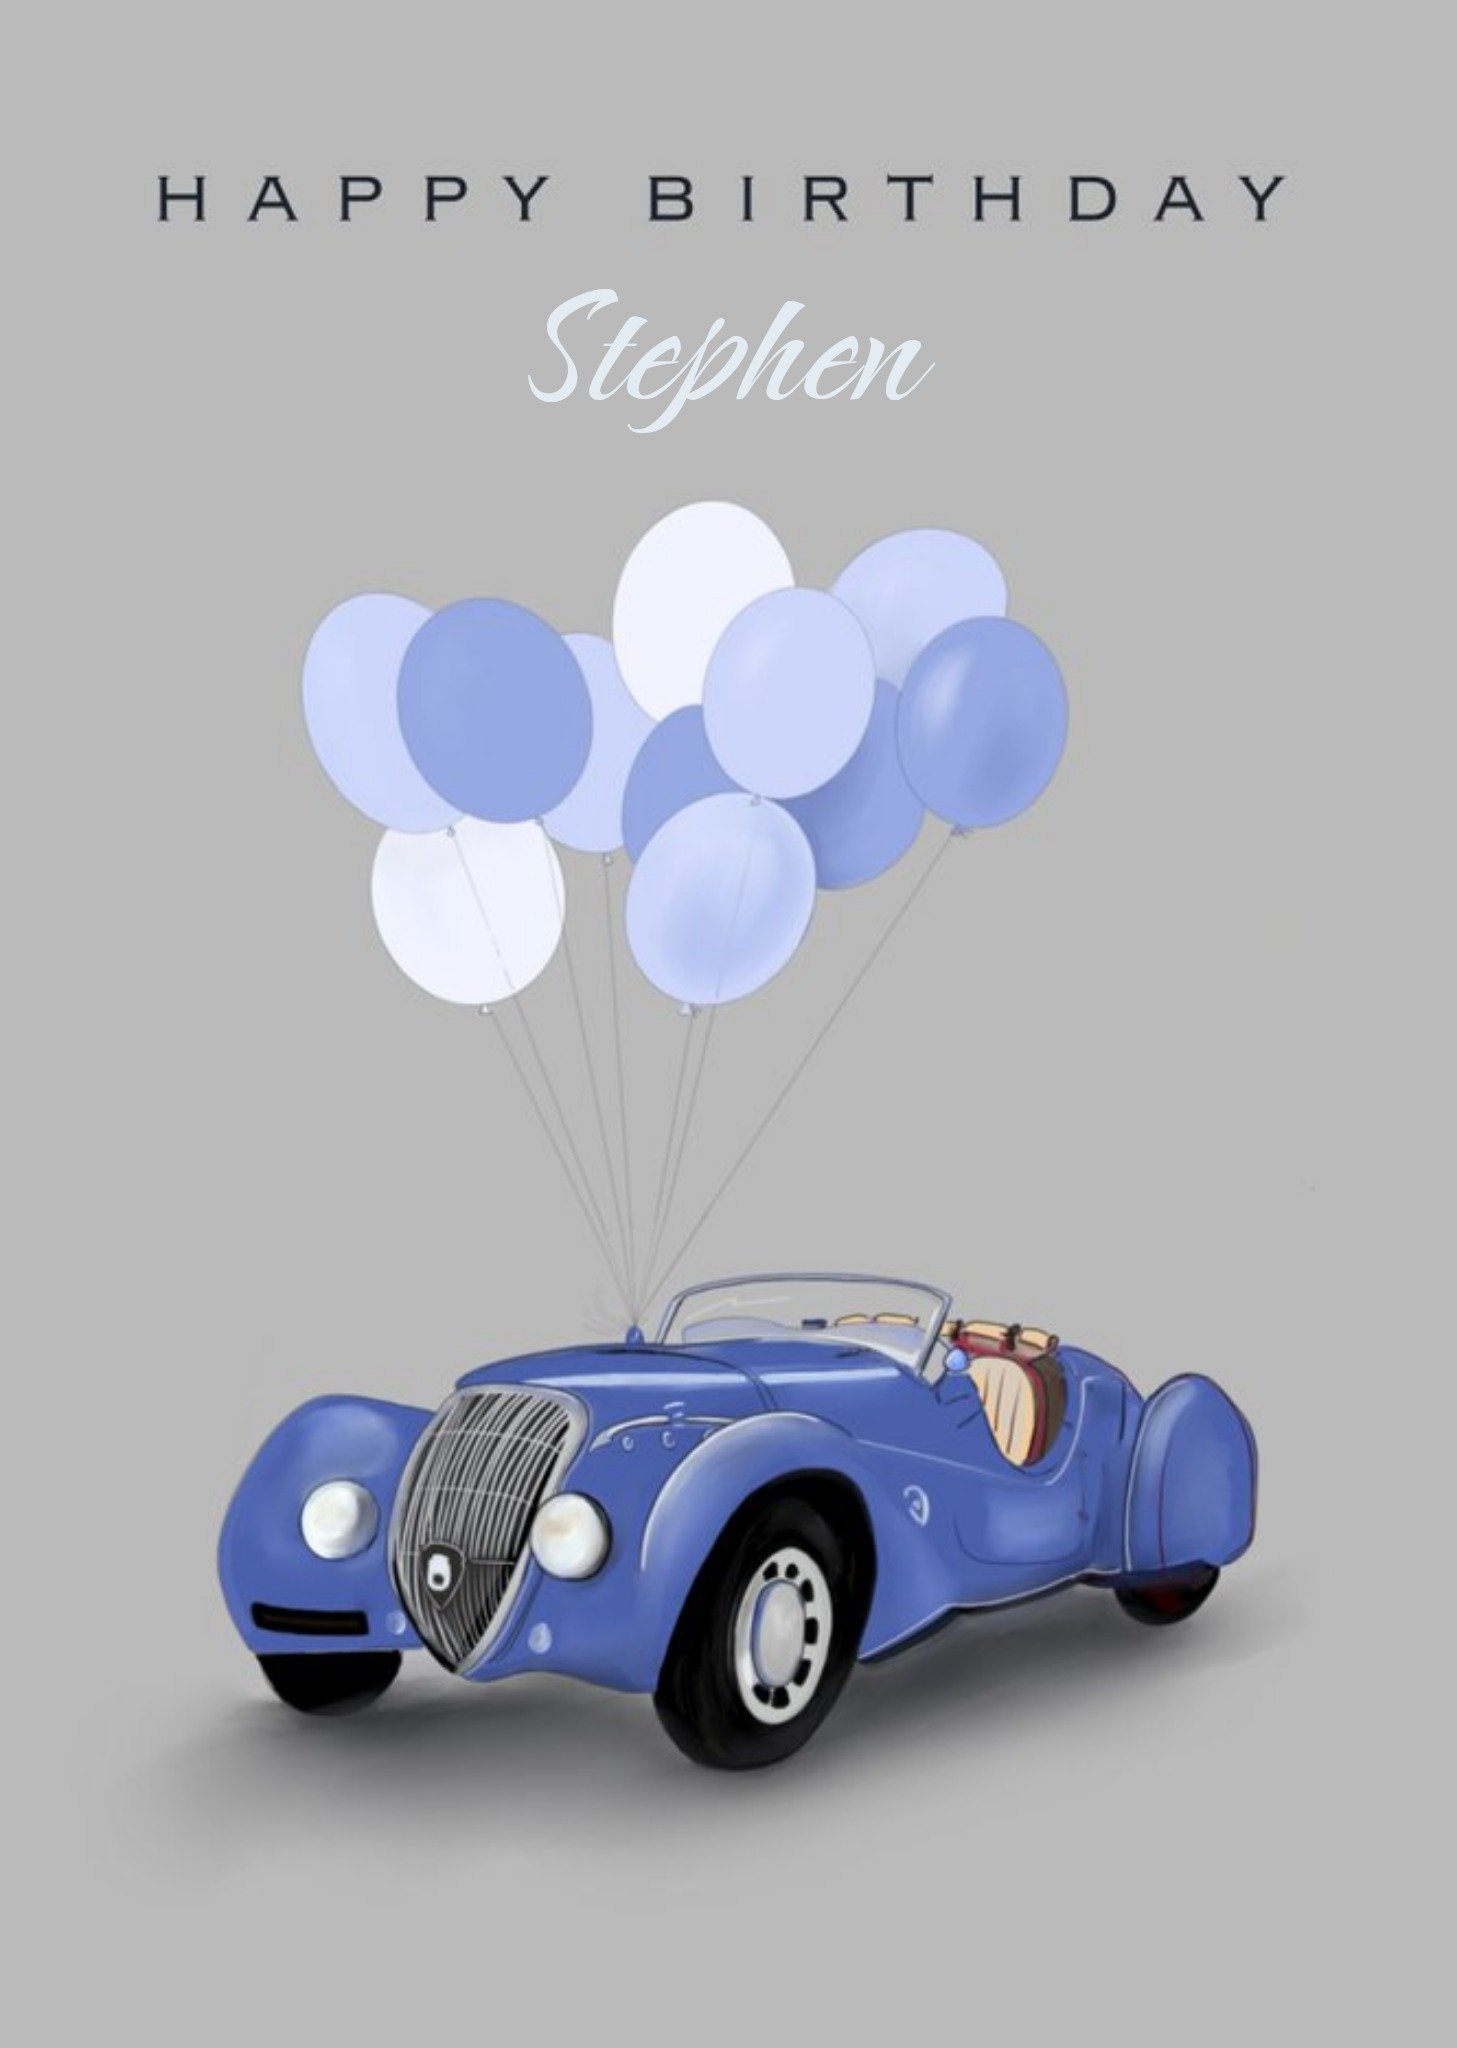 Moonpig Illustration Of A Classic Roadster With Balloons On A Grey Background Birthday Card Ecard